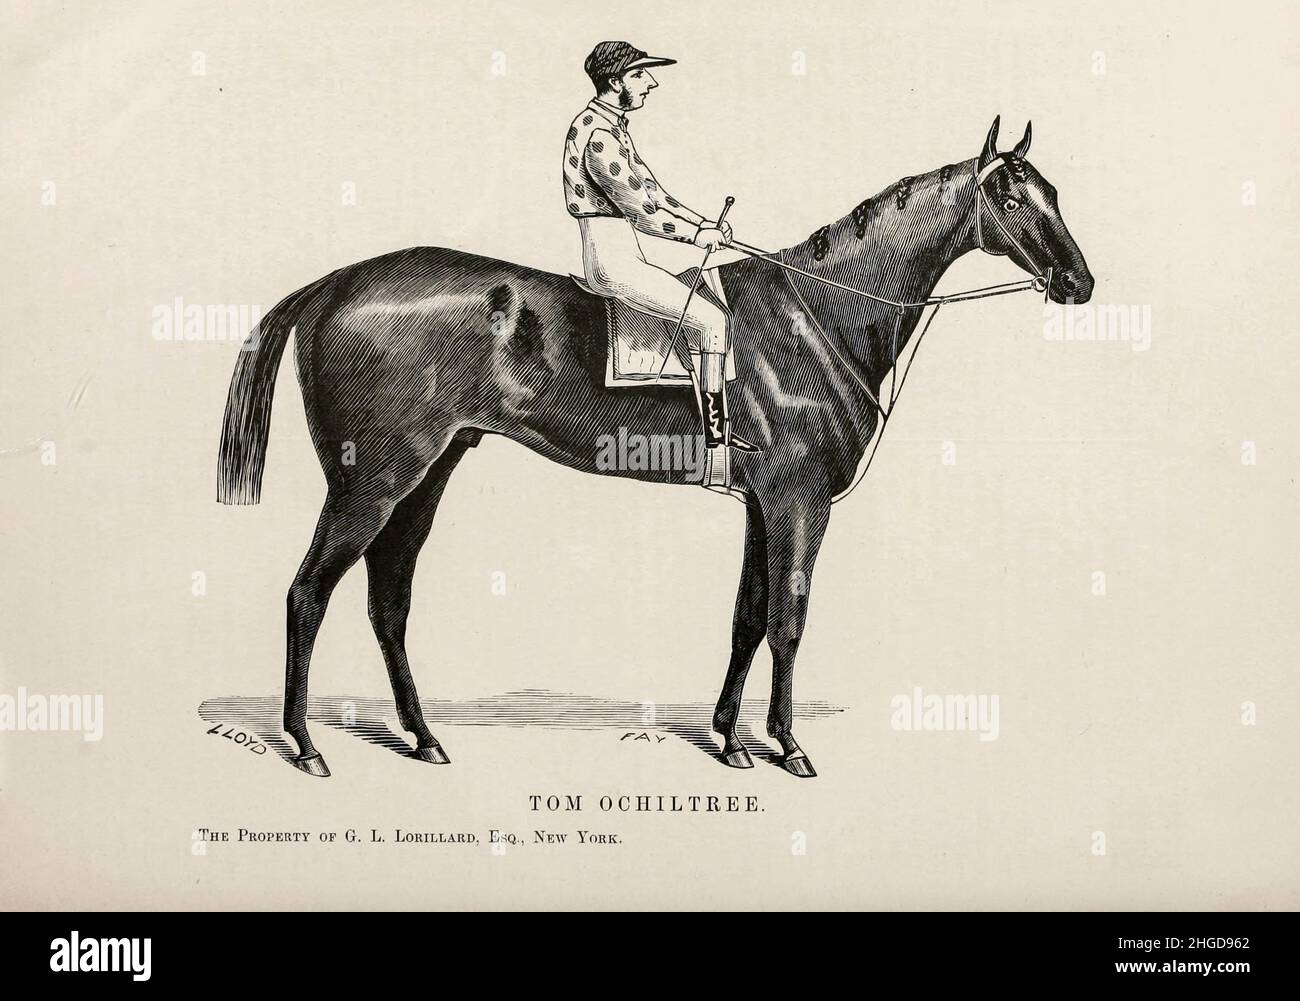 Tom Ochiltree Drawn by C. Lloyd [Tom Ochiltree (1872–1897), was an American Thoroughbred racehorse who won the 1875 Preakness Stakes and several other major stakes. In 1877, he lost in one of the most famous match races of the nineteenth century – a race that had been so anticipated that both houses of Congress were adjourned so members could attend. In 2016, Tom Ochiltree was inducted into the National Museum of Racing and Hall of Fame]. From the book ' Famous American race horses ' published in 1877 by Porter and Coates Philadelphia, Stock Photo